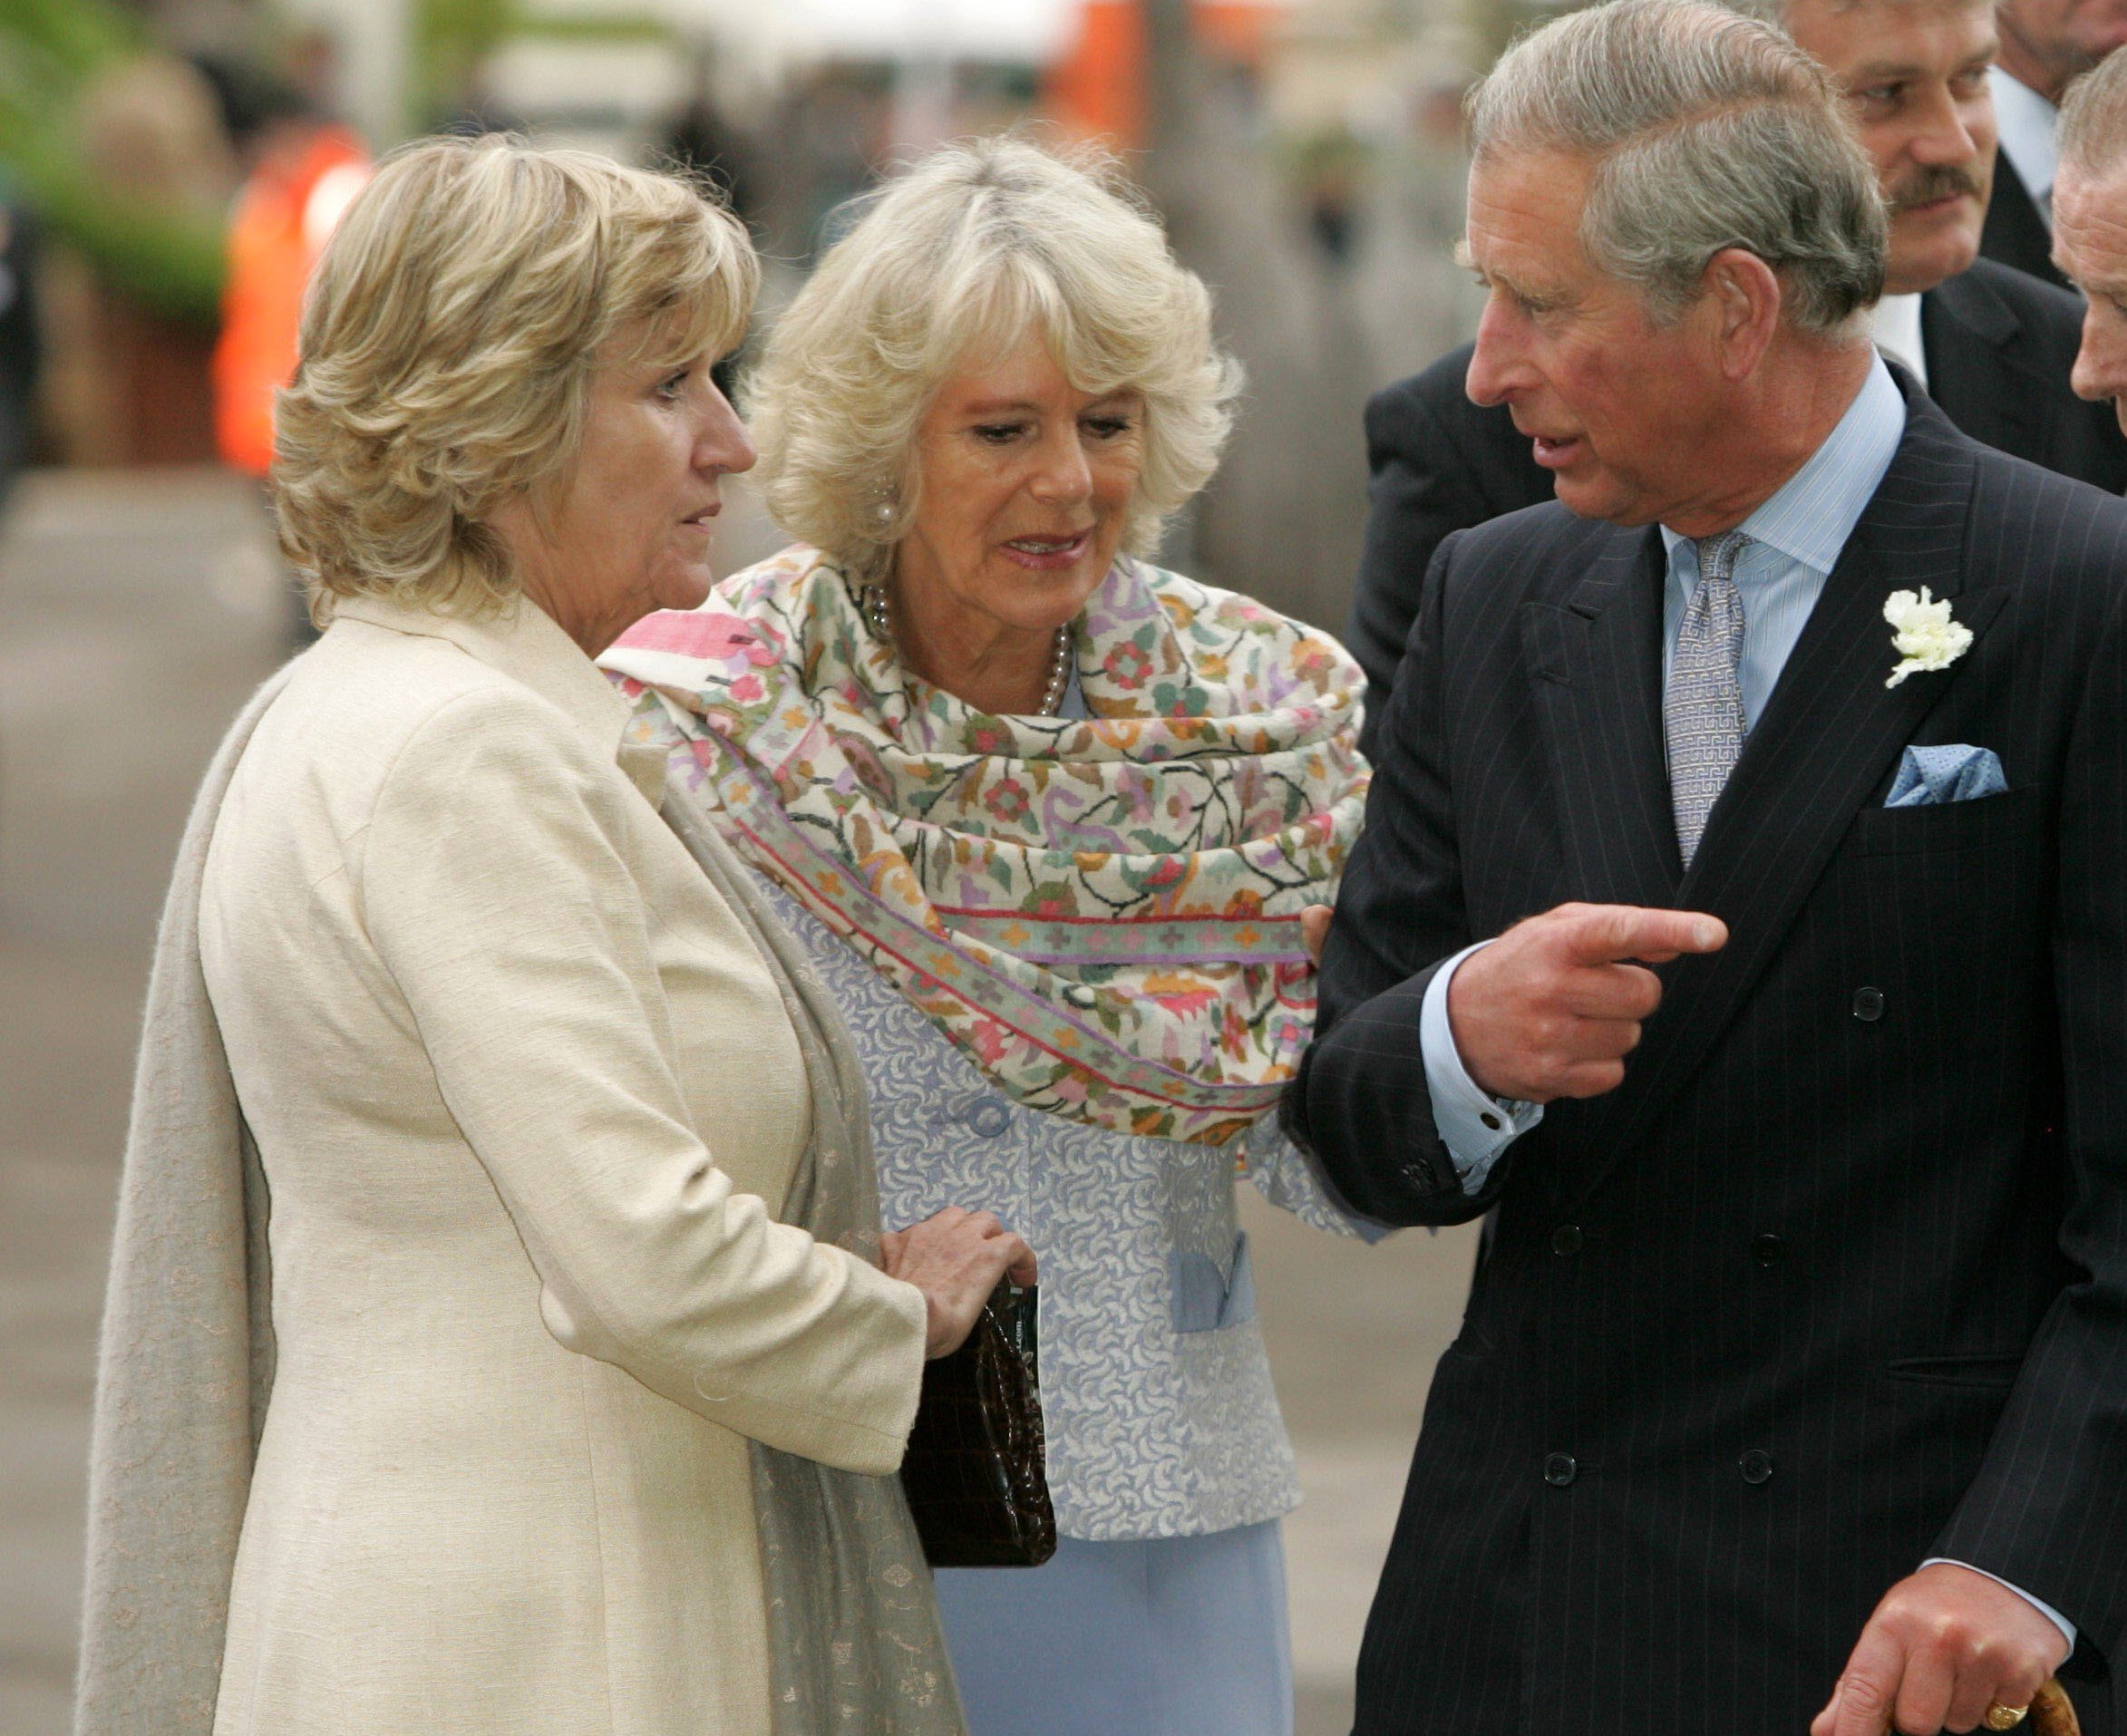 Prince Charles, Camilla Parker Bowles, and the duchess's sister, Annabel Elliot, attend the Chelsea Flower Show